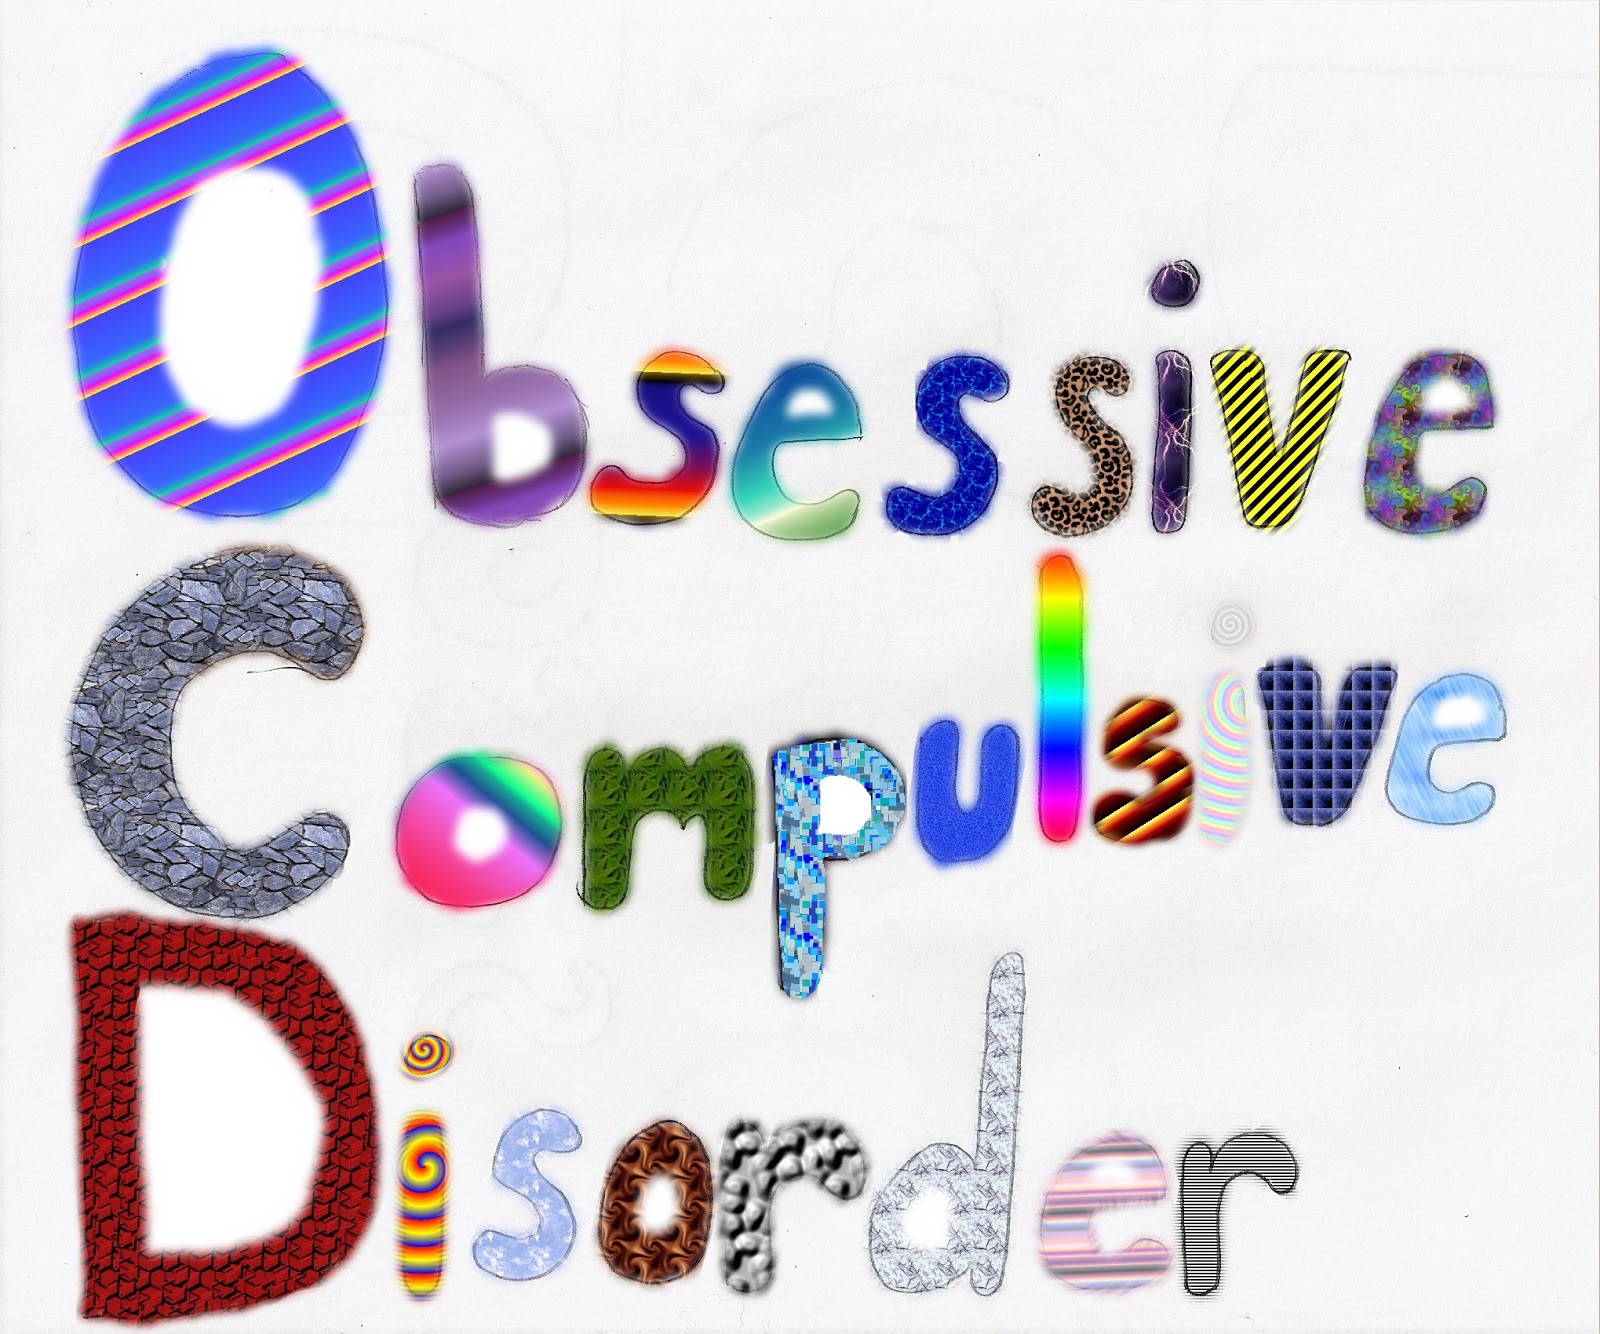 What is obsessive-compulsive disorder?